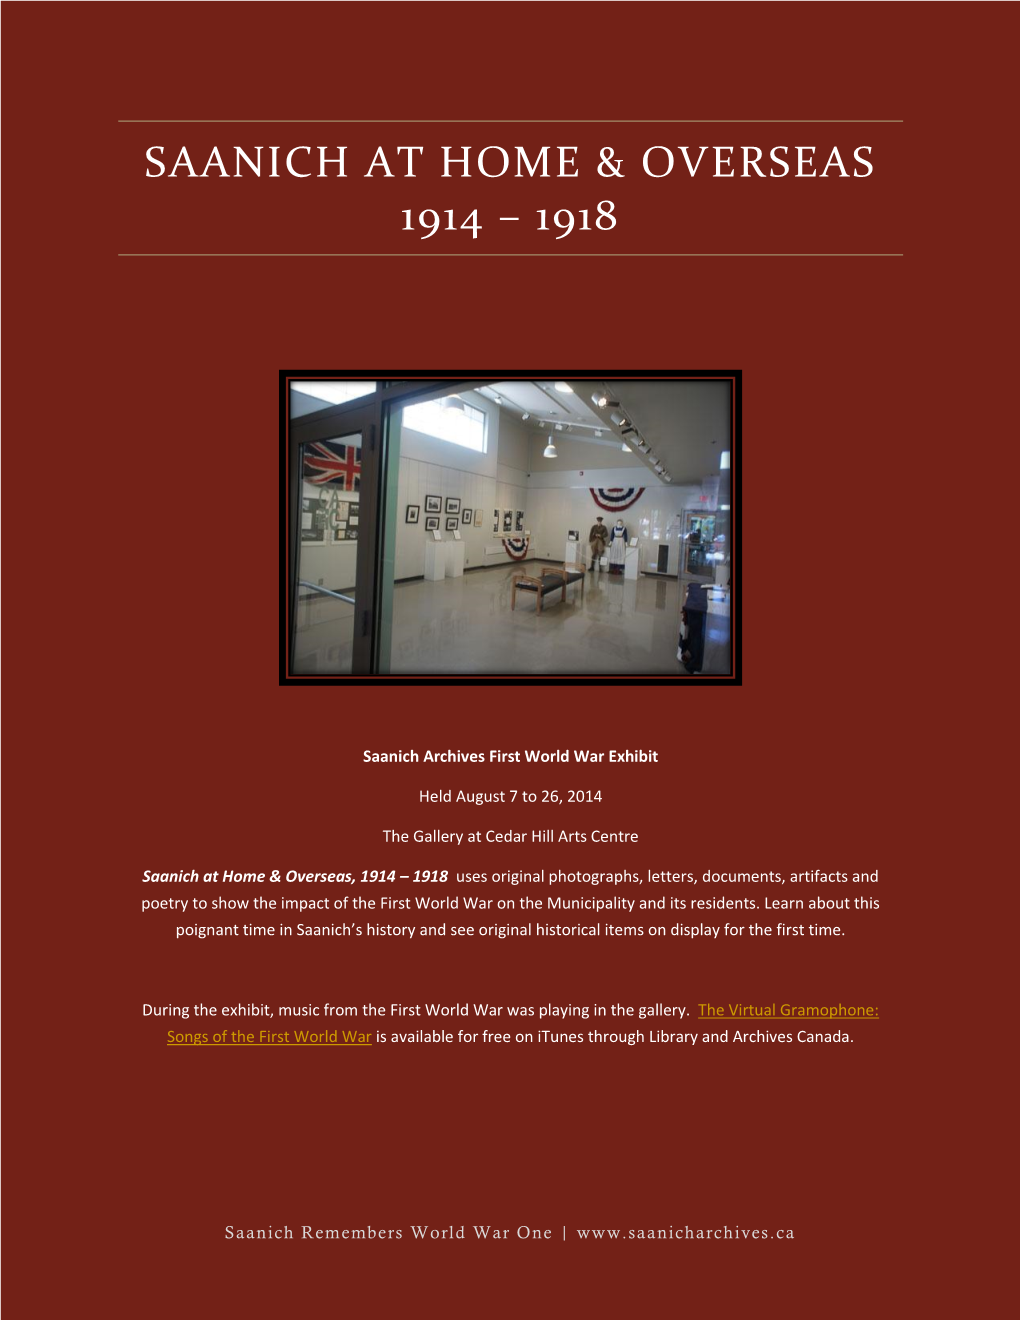 Saanich at Home & Overseas 1914 – 1918